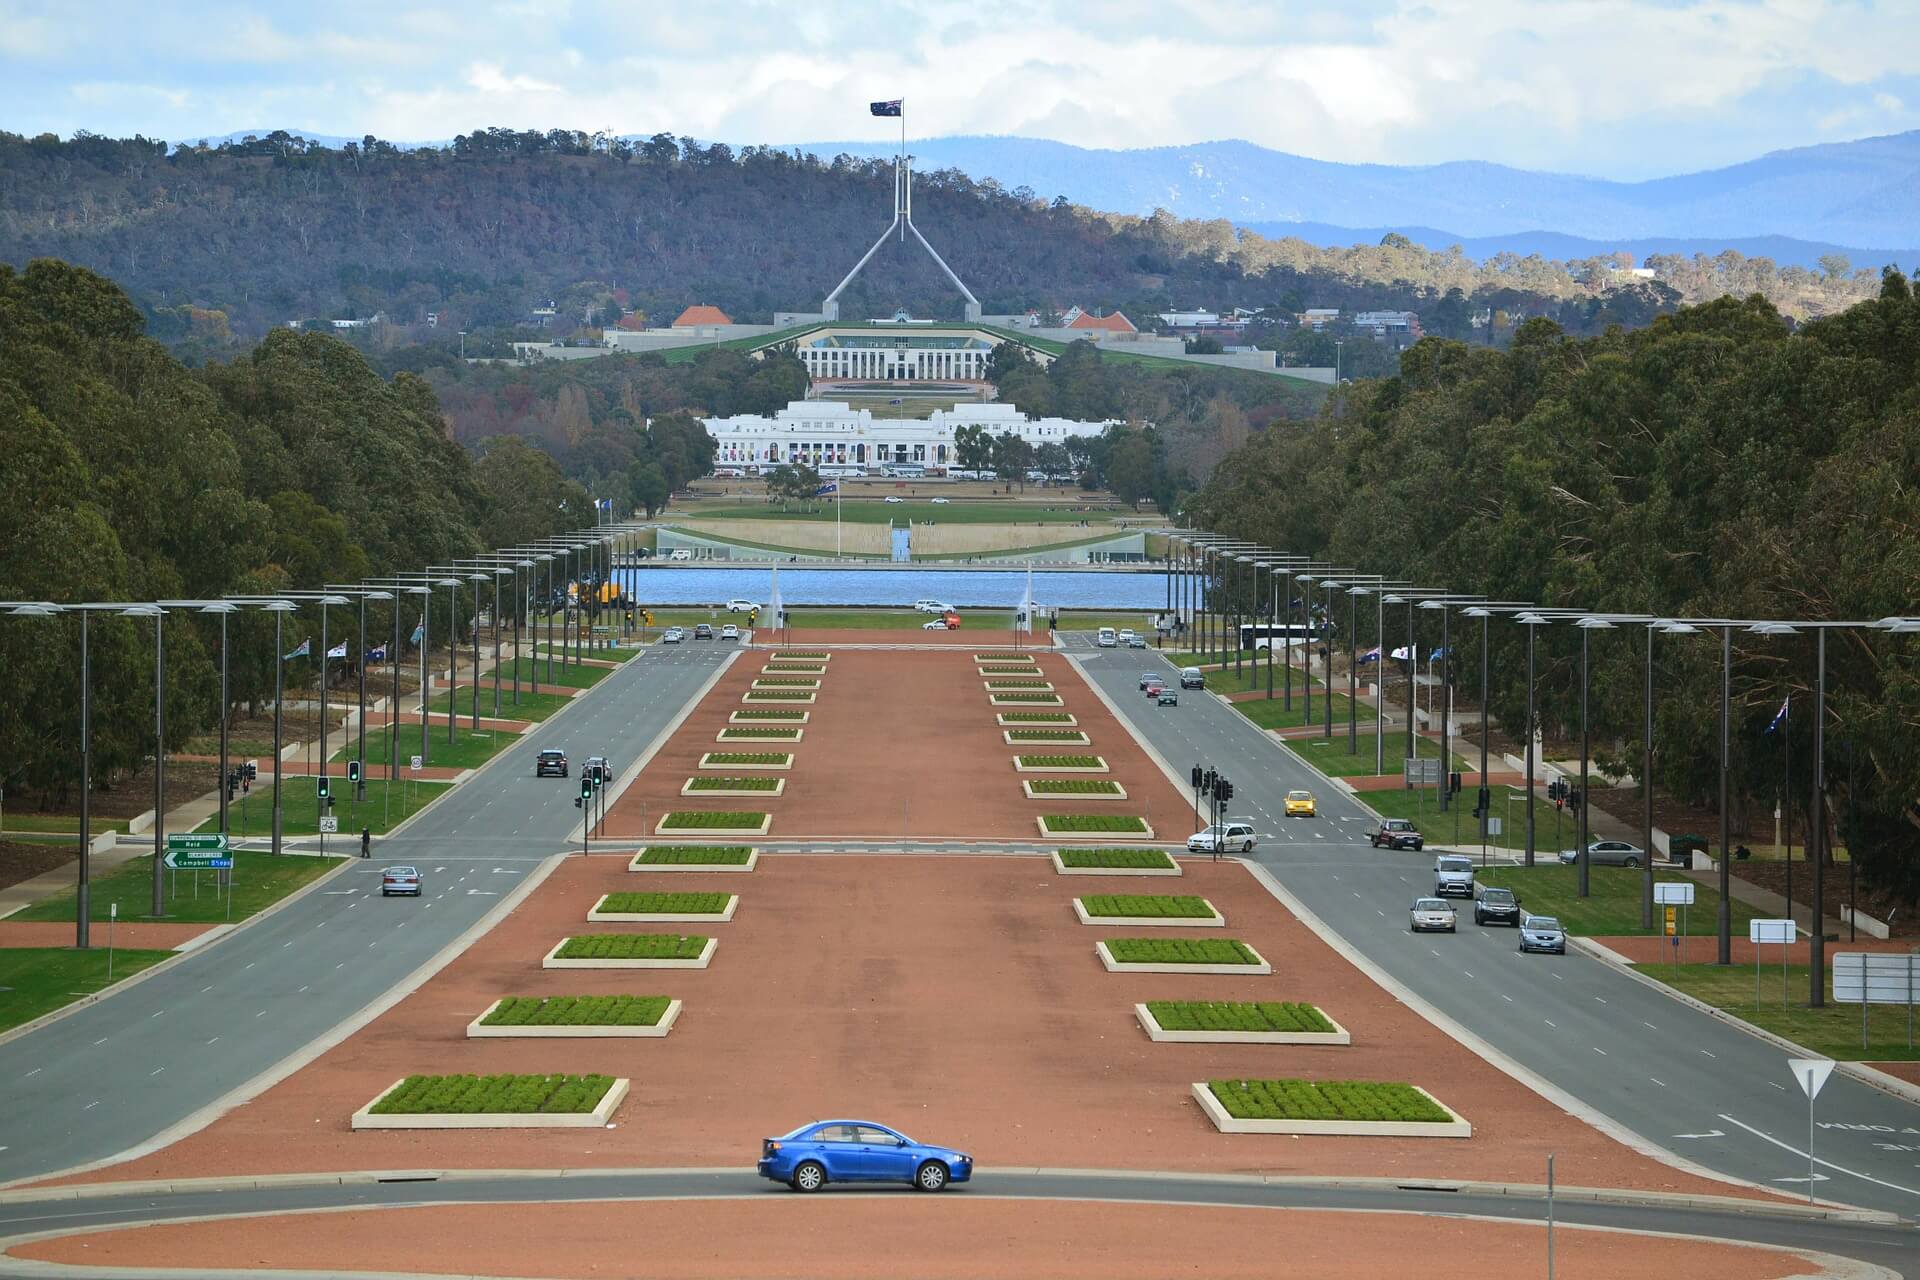 About Canberra